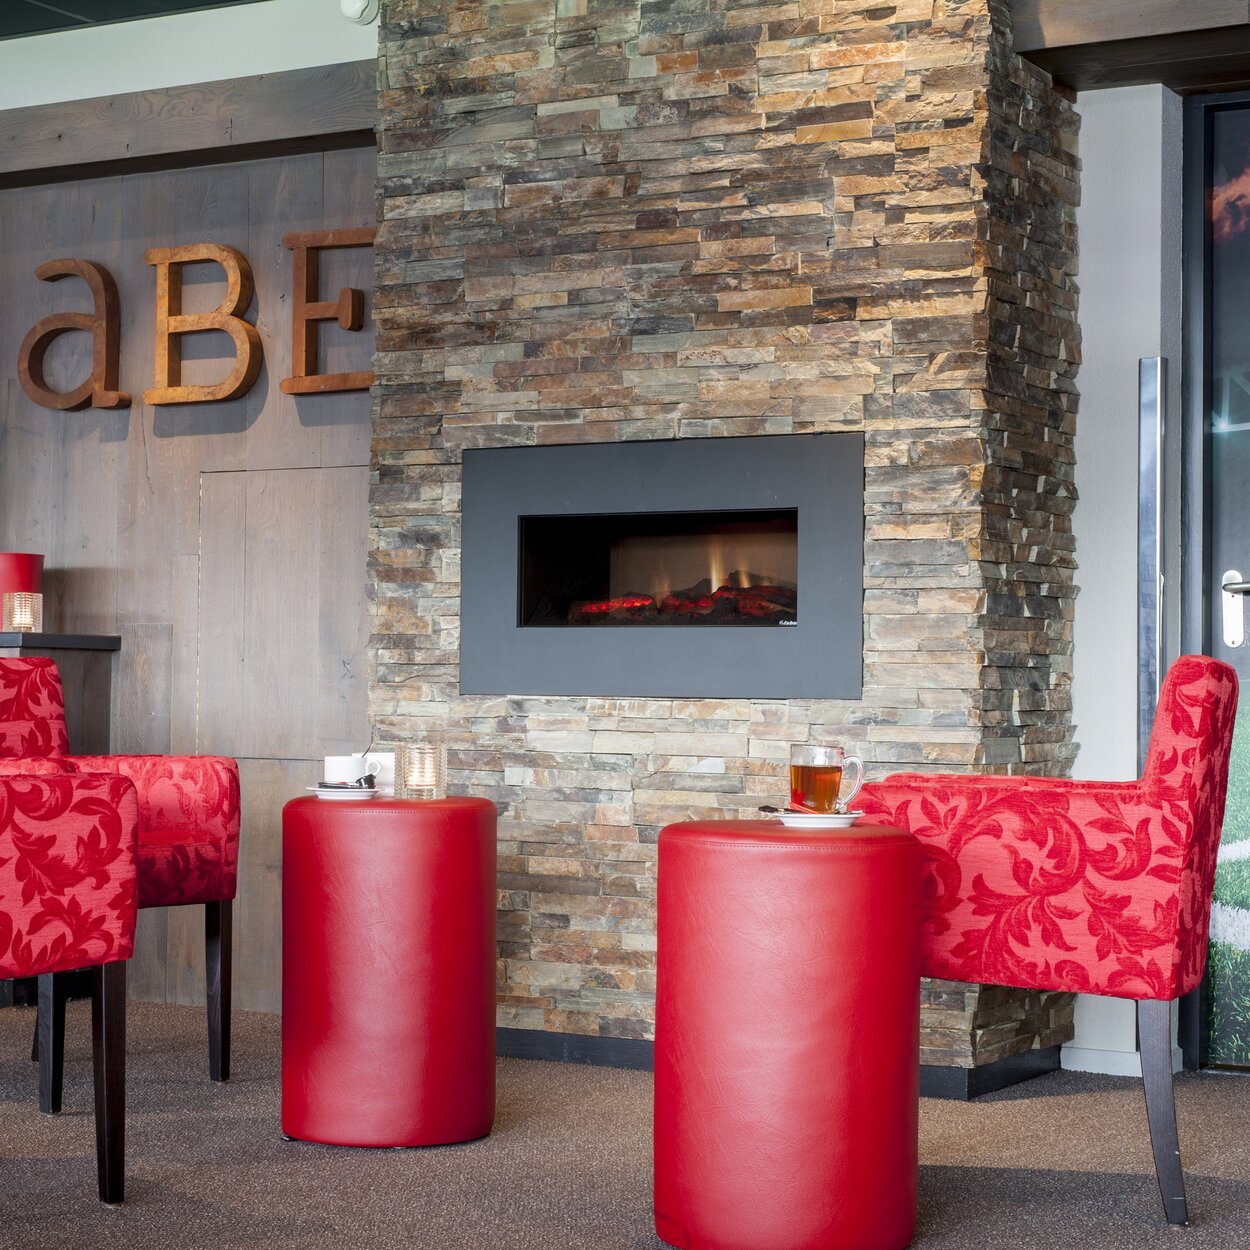 Opti-V-Single electric fire in the bar with red furniture built into a stone wall